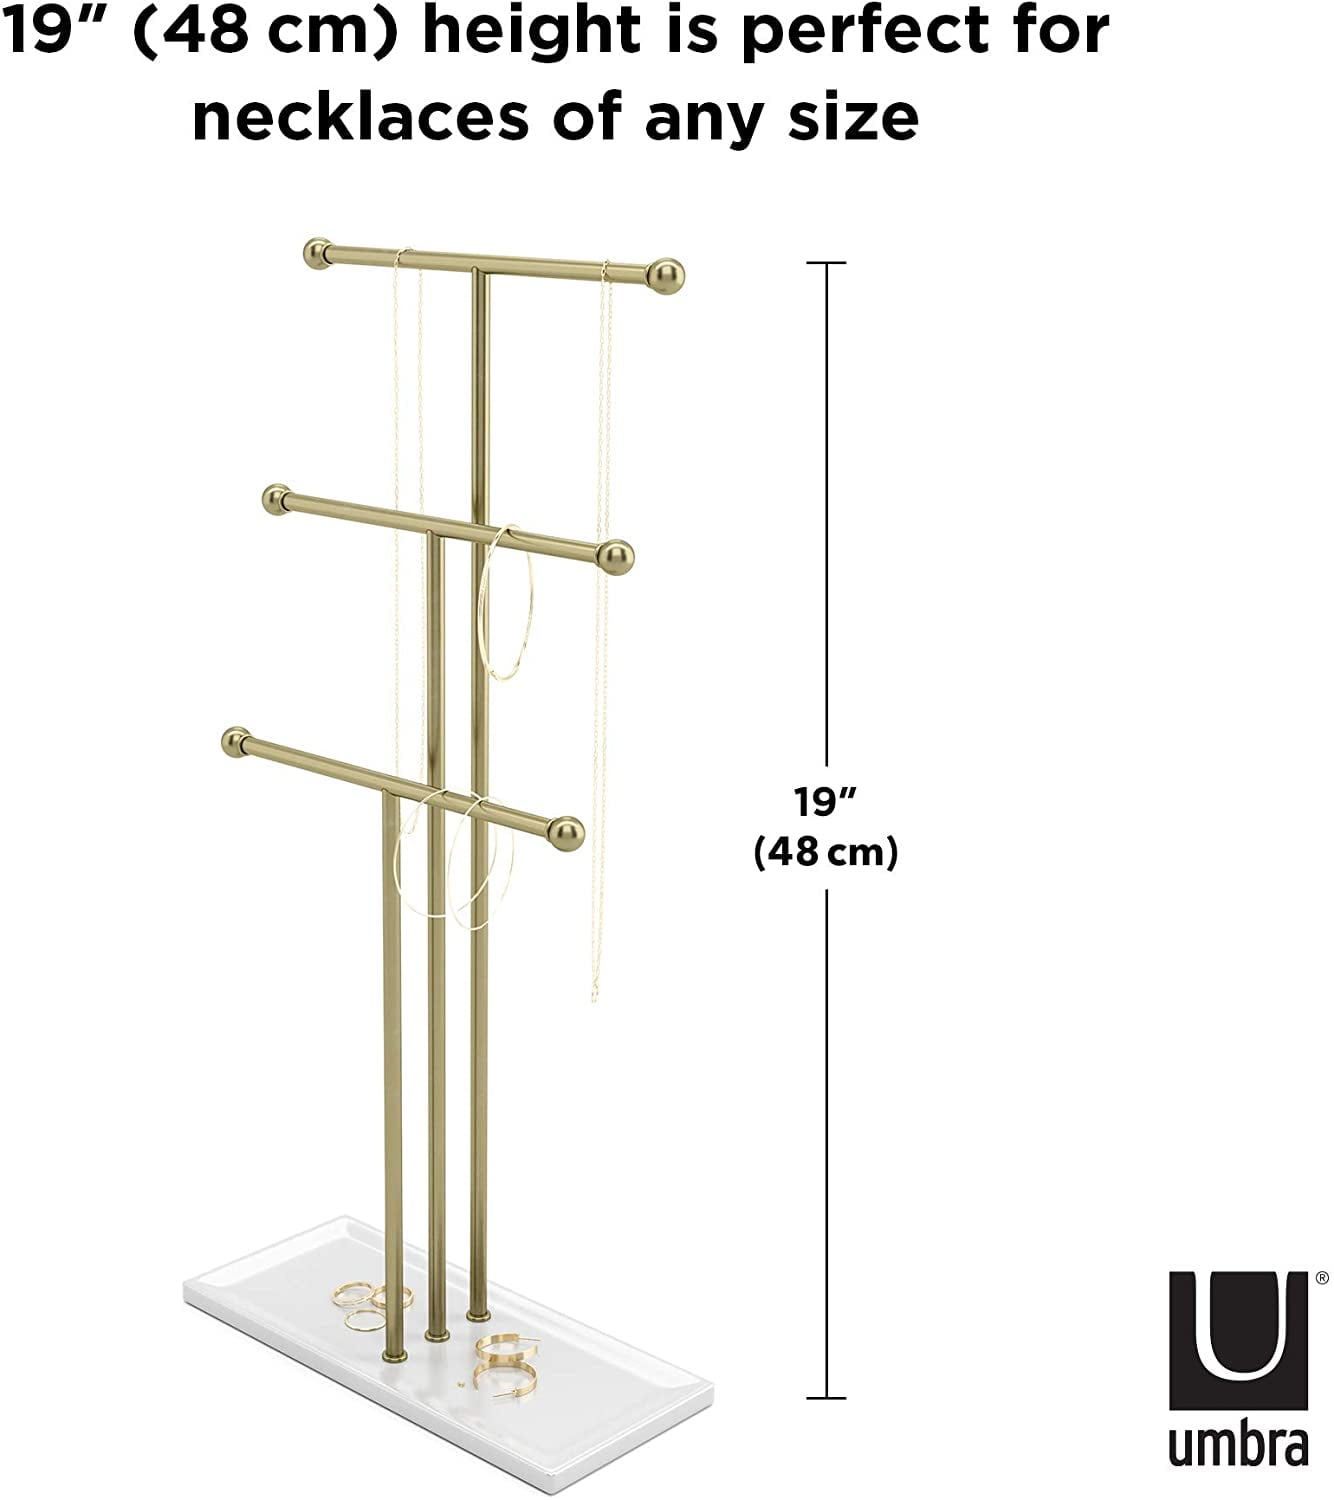 Black 3 Bracelets and Earrings Umbra Trigem Three Tiered Tabletop Organizer for Necklace 